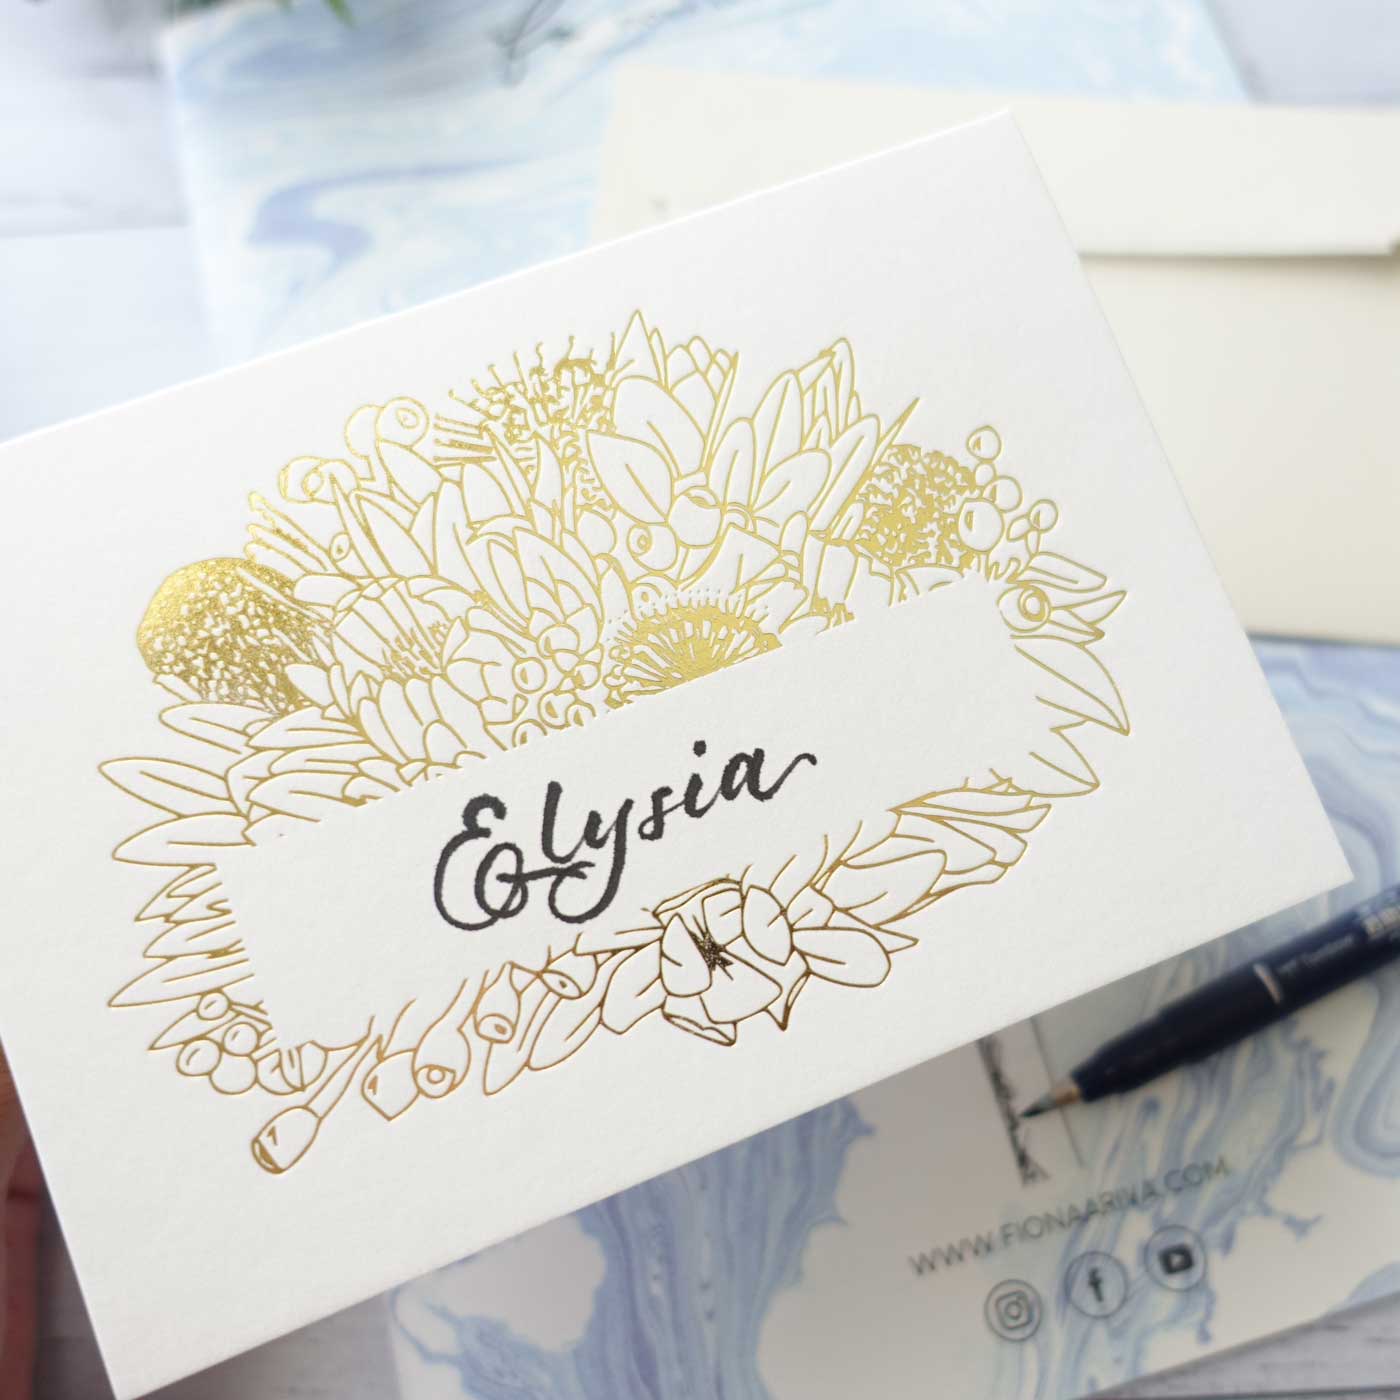 Greeting card with handlettering written in brush pen calligraphy